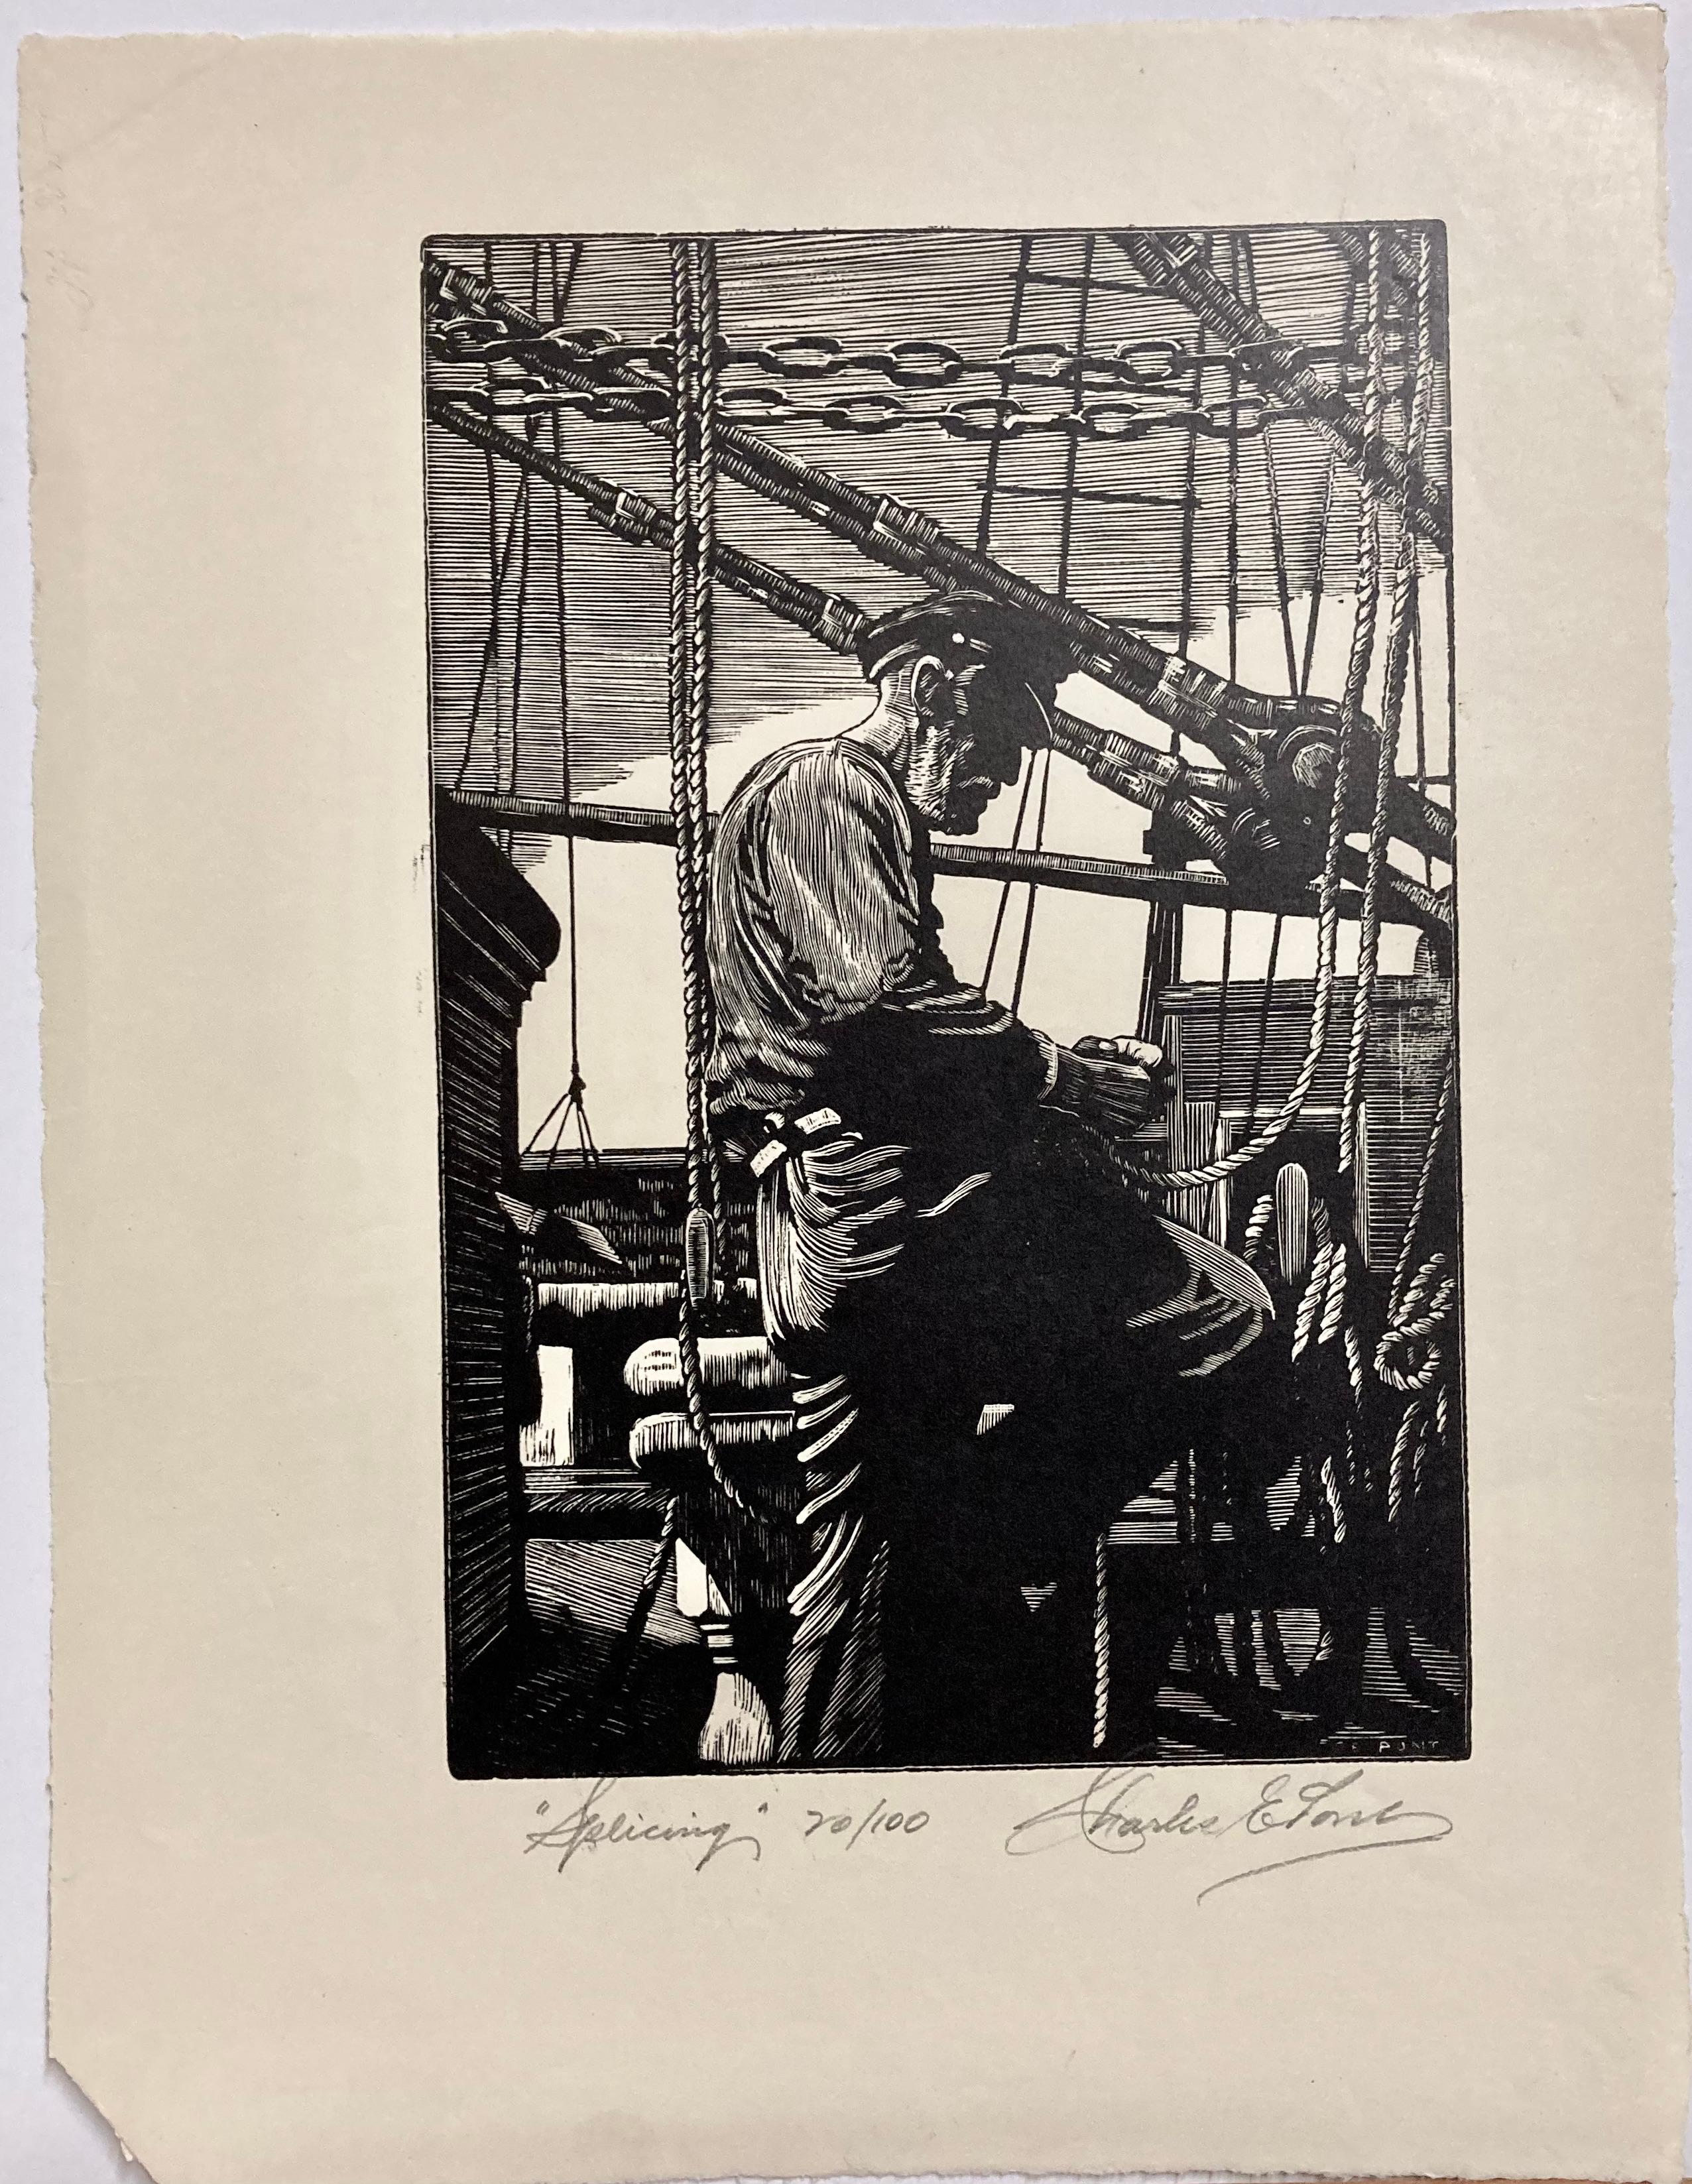 An old sailor is shown at work on a what must be a huge sailing vessel. He's splicing, or joining ropes together -- probably still a useful skill in the mid-1930s when this print was made.

Charles Pont was a master wood engraver and the extremely